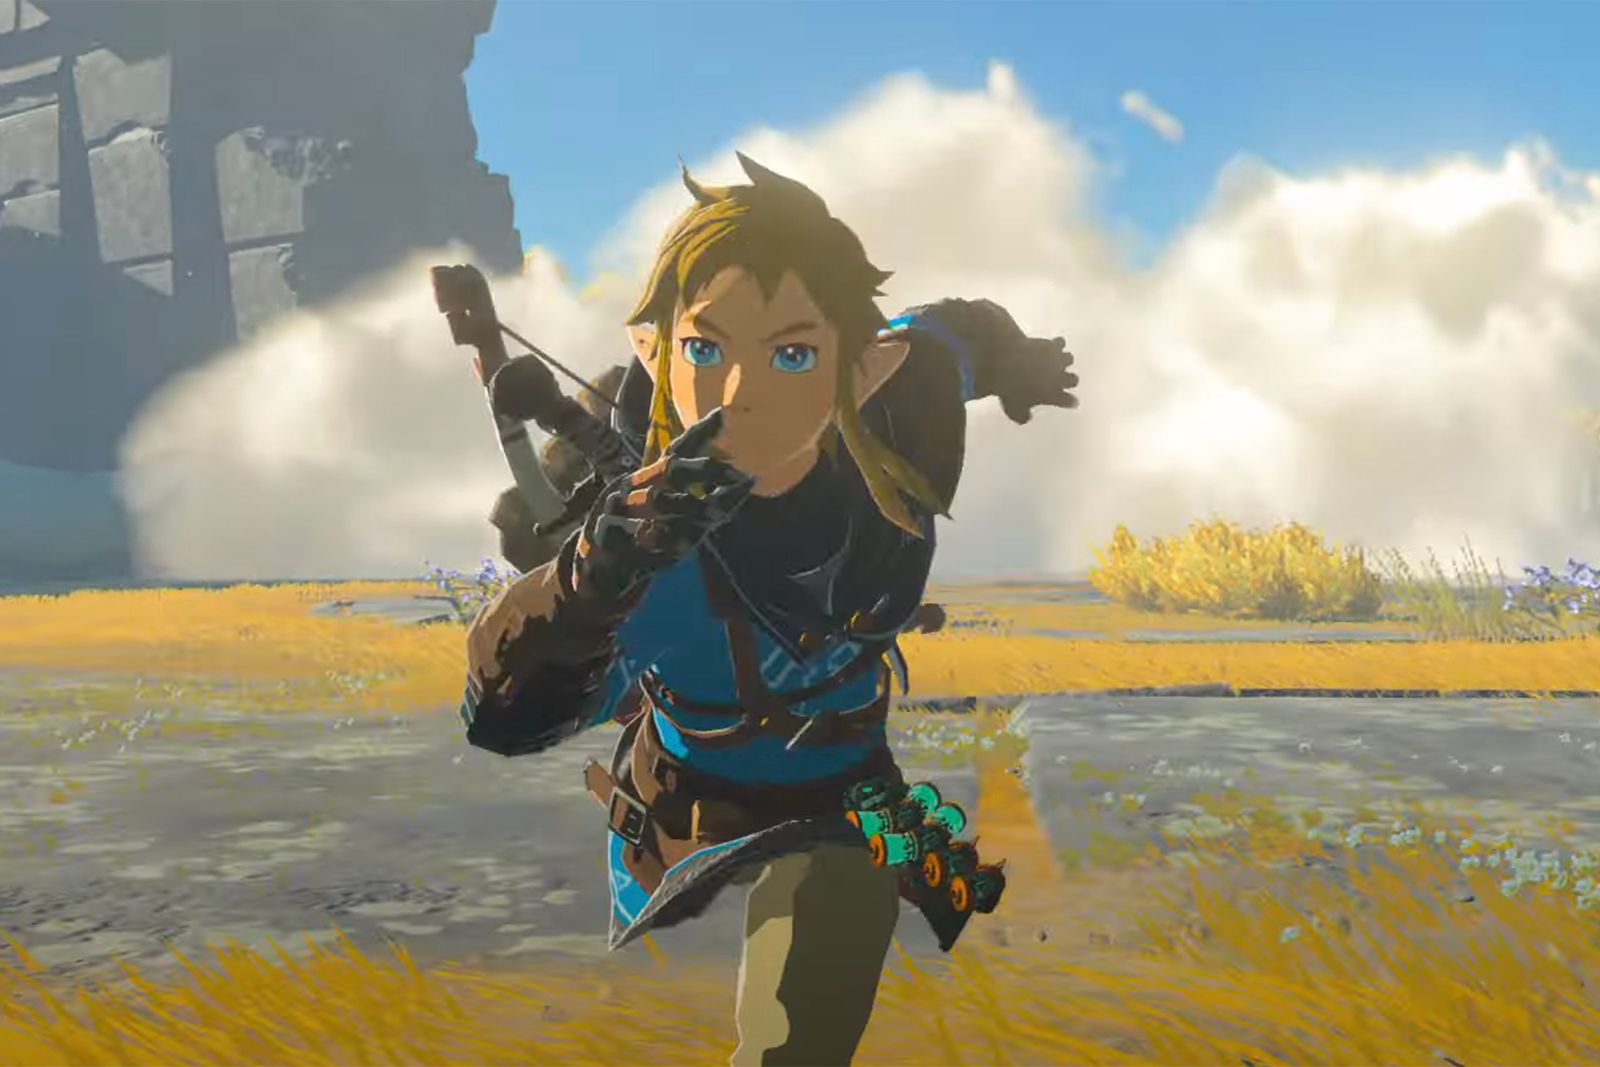 Nintendo Direct February 2023: How to watch and what to expect